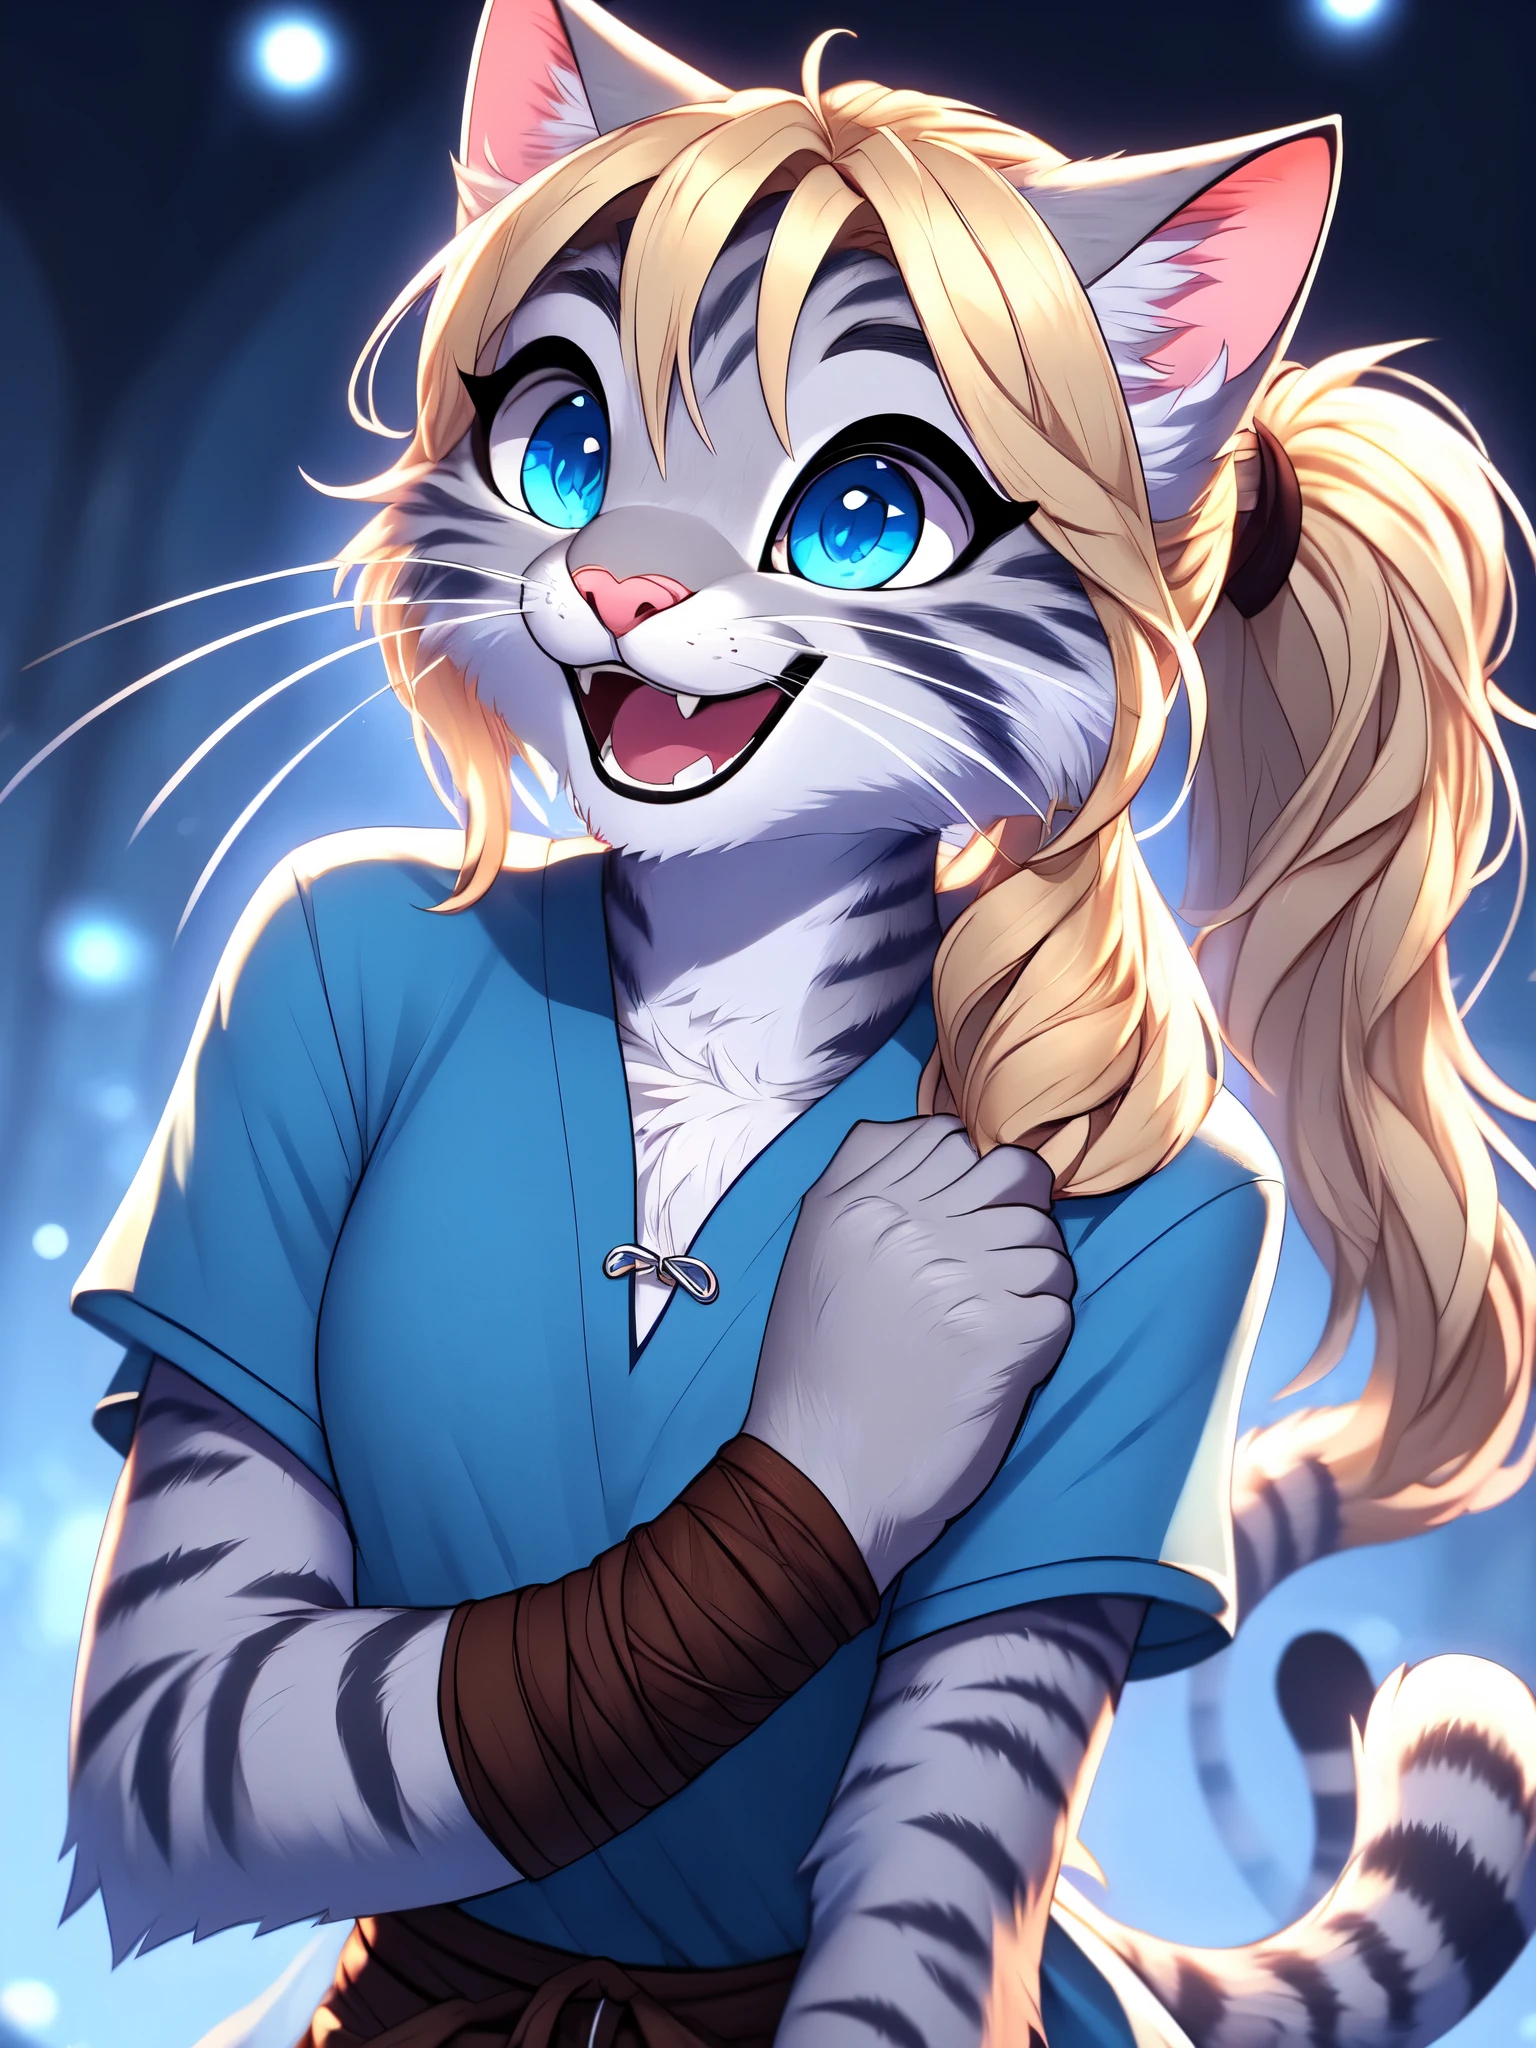 Kat, anthro furry feline, blue eyes, silver fur, striped fur, :3, pink nose, white whiskers, cat tail, blonde hair, side locks, hair in a pony tail, wearing blue tunic, close up, portrait, big smile, happy, upper body shot, big happy open mouth smile, 